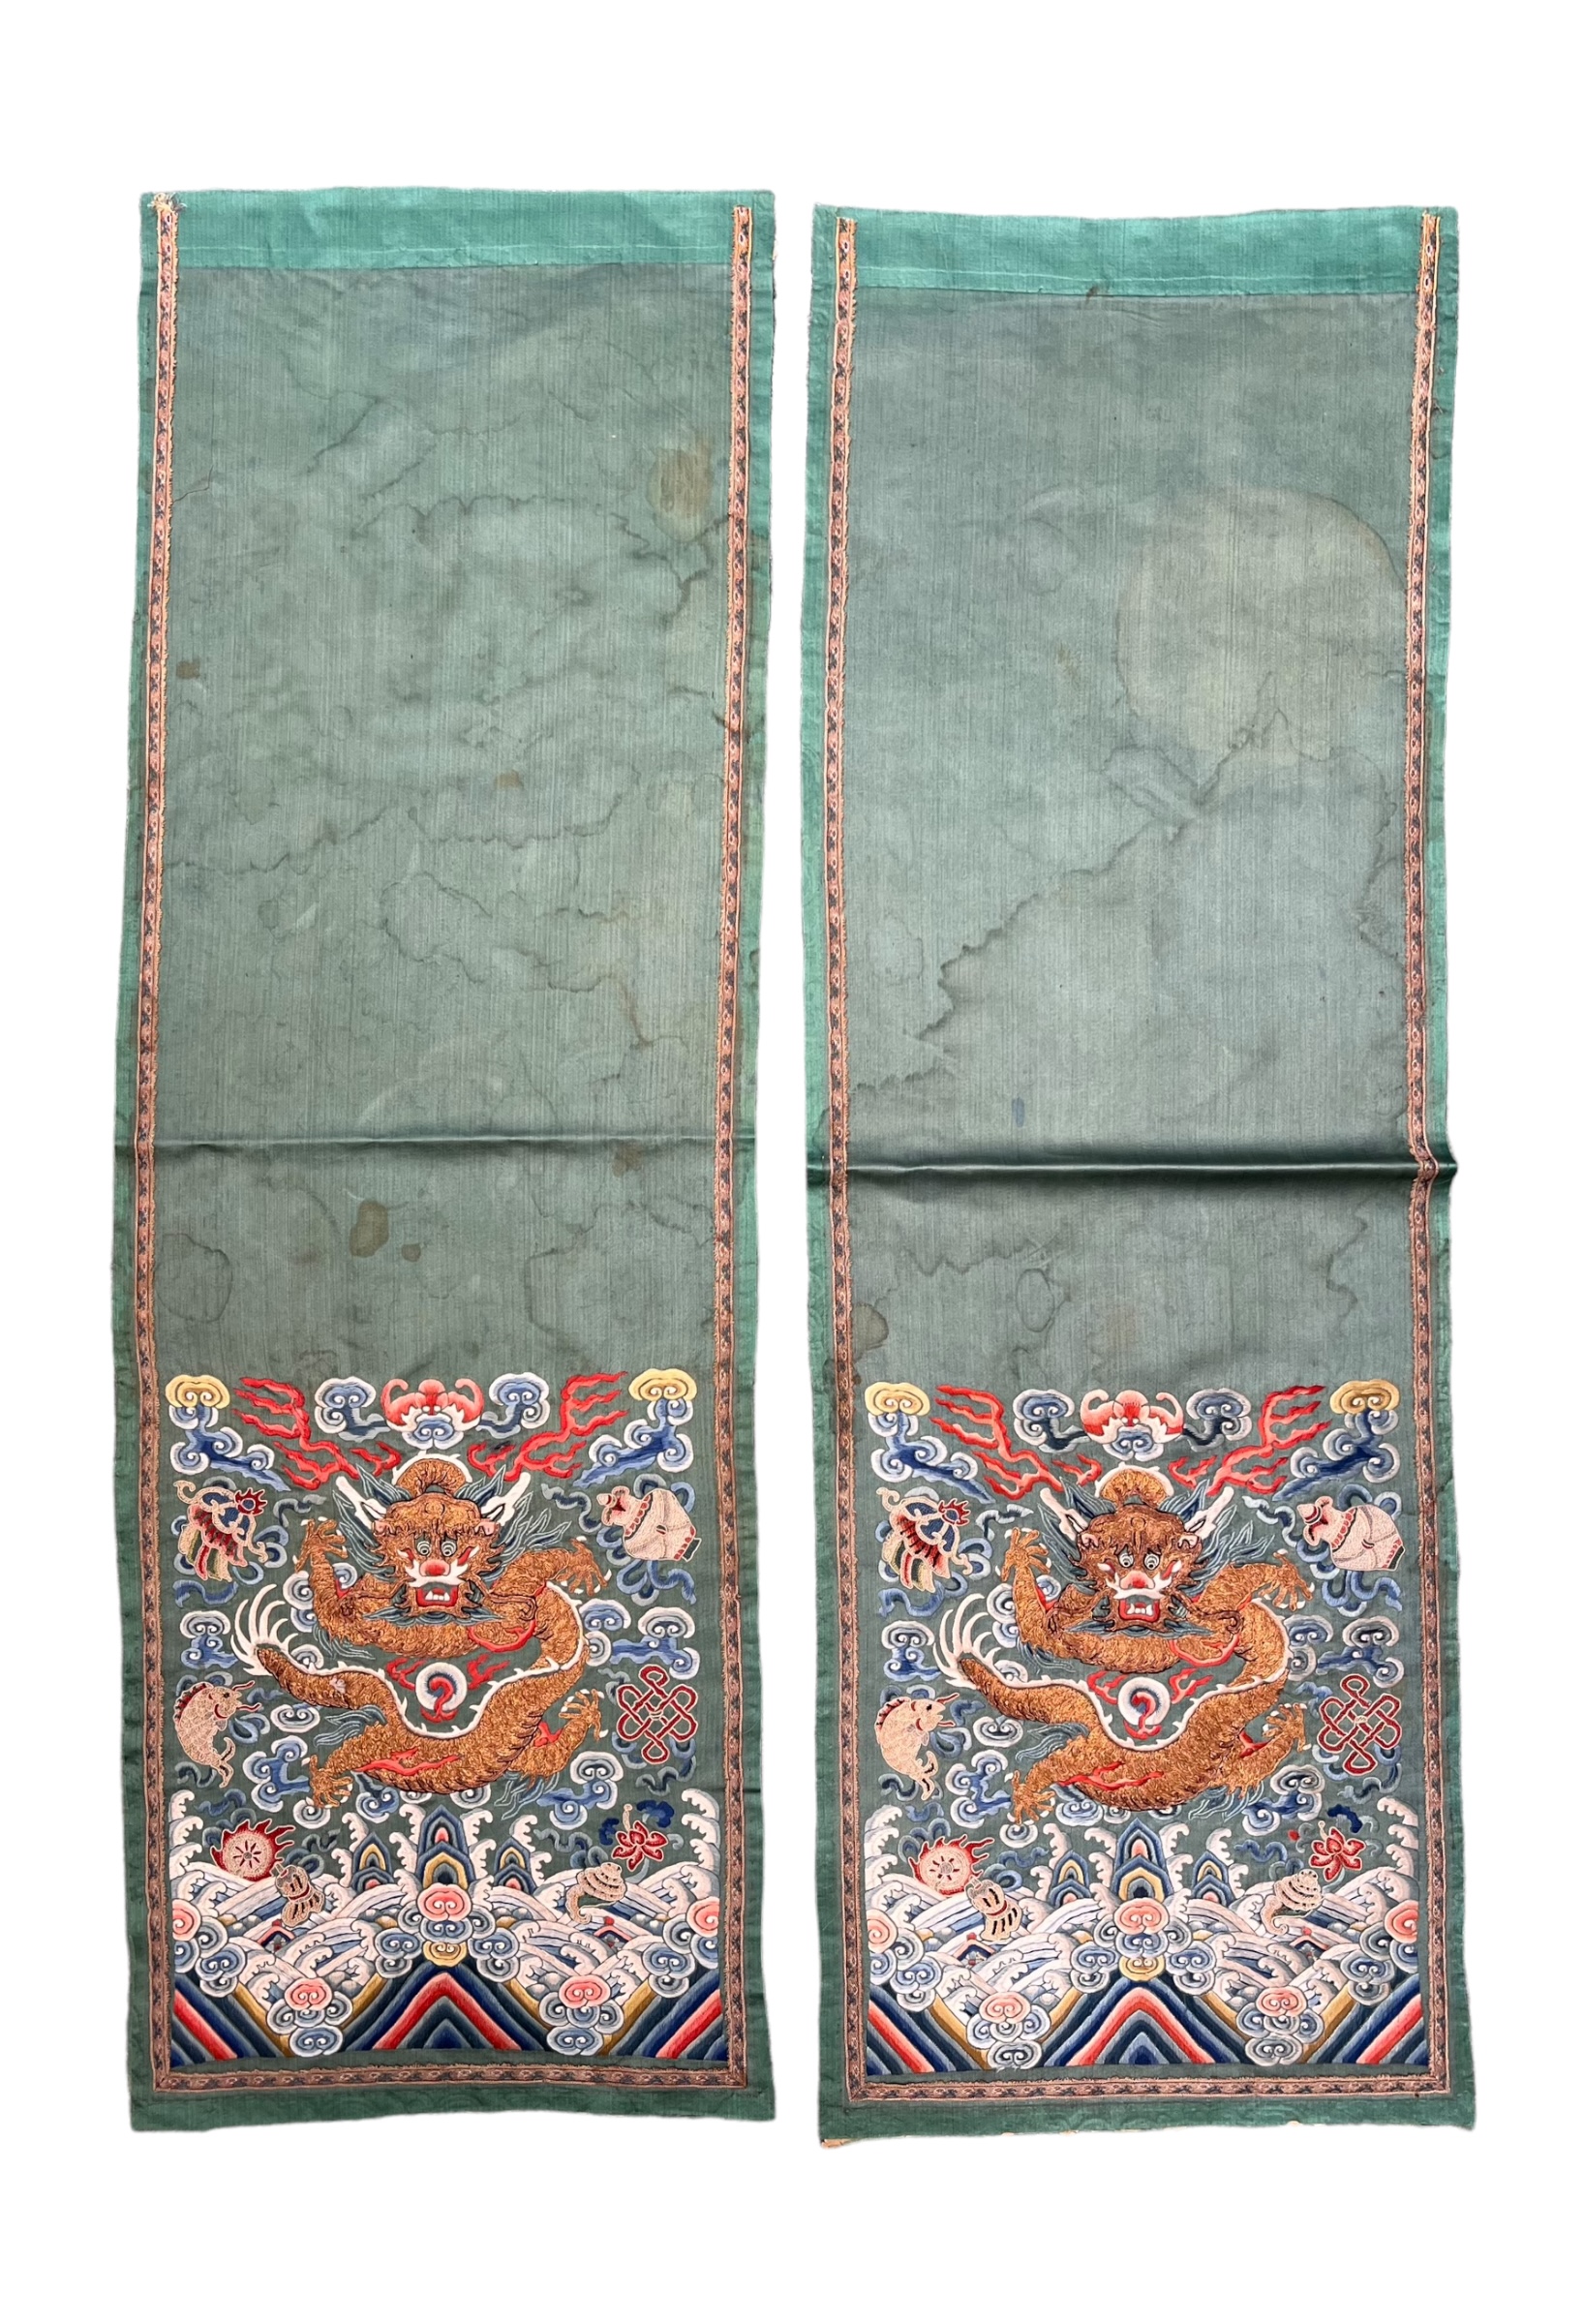 A Pair of Rectangular Dragon Embroideries, Qing dynasty, - Image 2 of 2